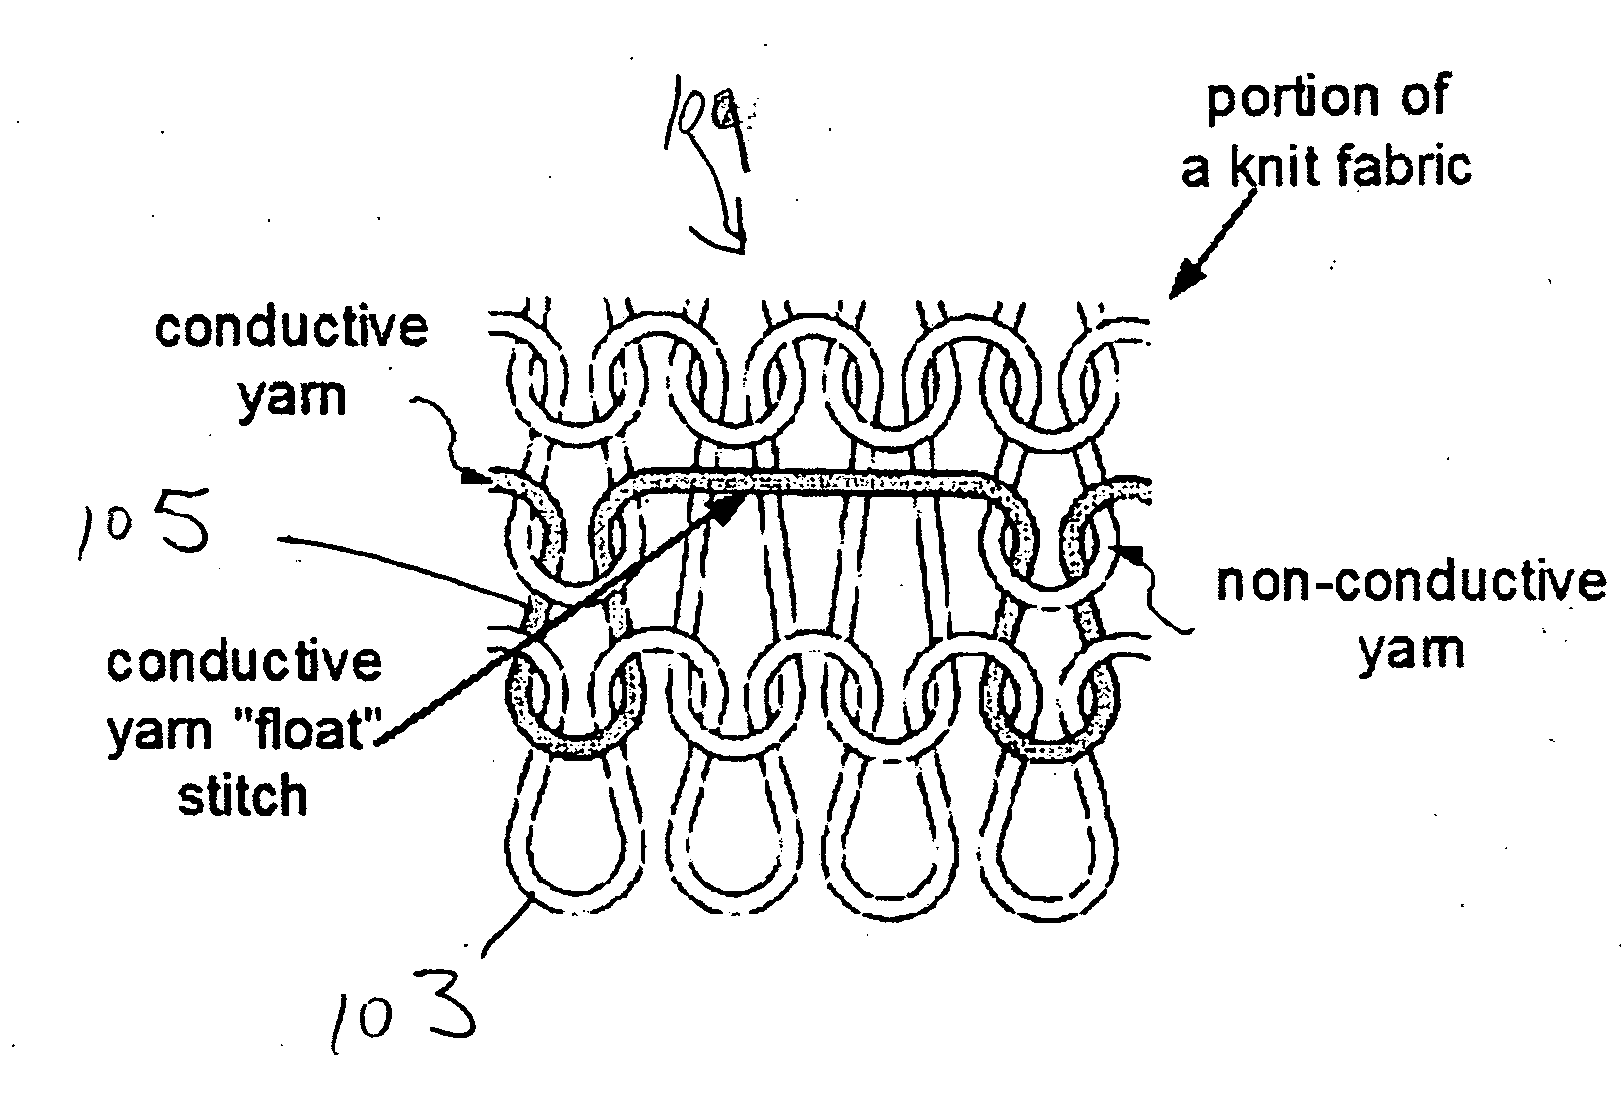 Surface functional electro-textile with functionality modulation capability, methods for making the same, and applications incorporating the same